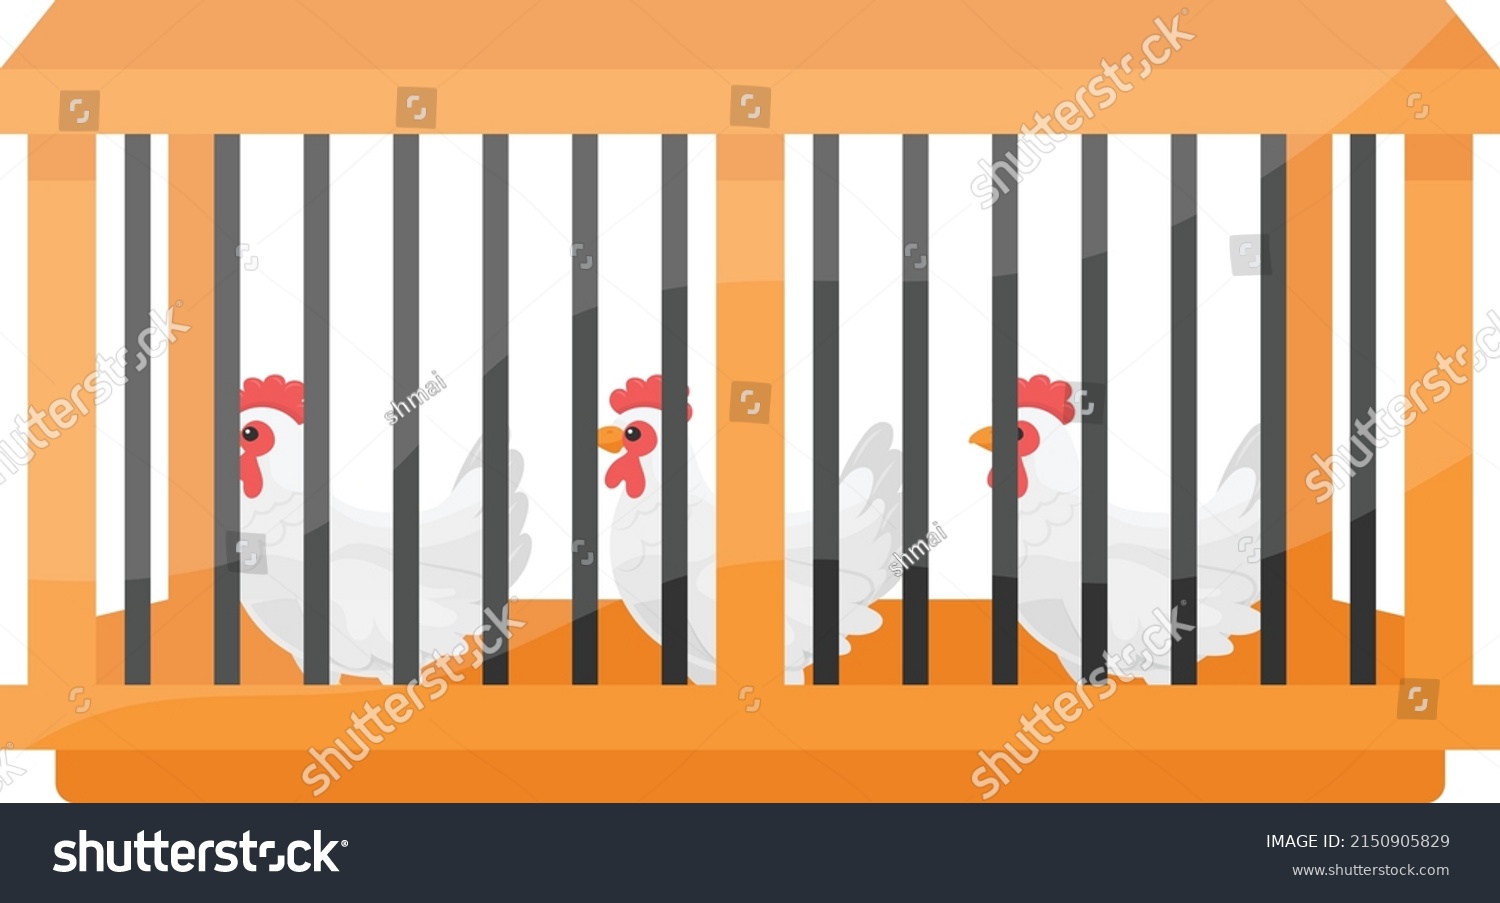 Sturdy Spacious wooden hen cage for Varied Animals Concept, hen livery vector color icon design, Poultry farming symbol, Meat or Eggs Production Sign, Protein and farmyard equipment stock illustration #2150905829